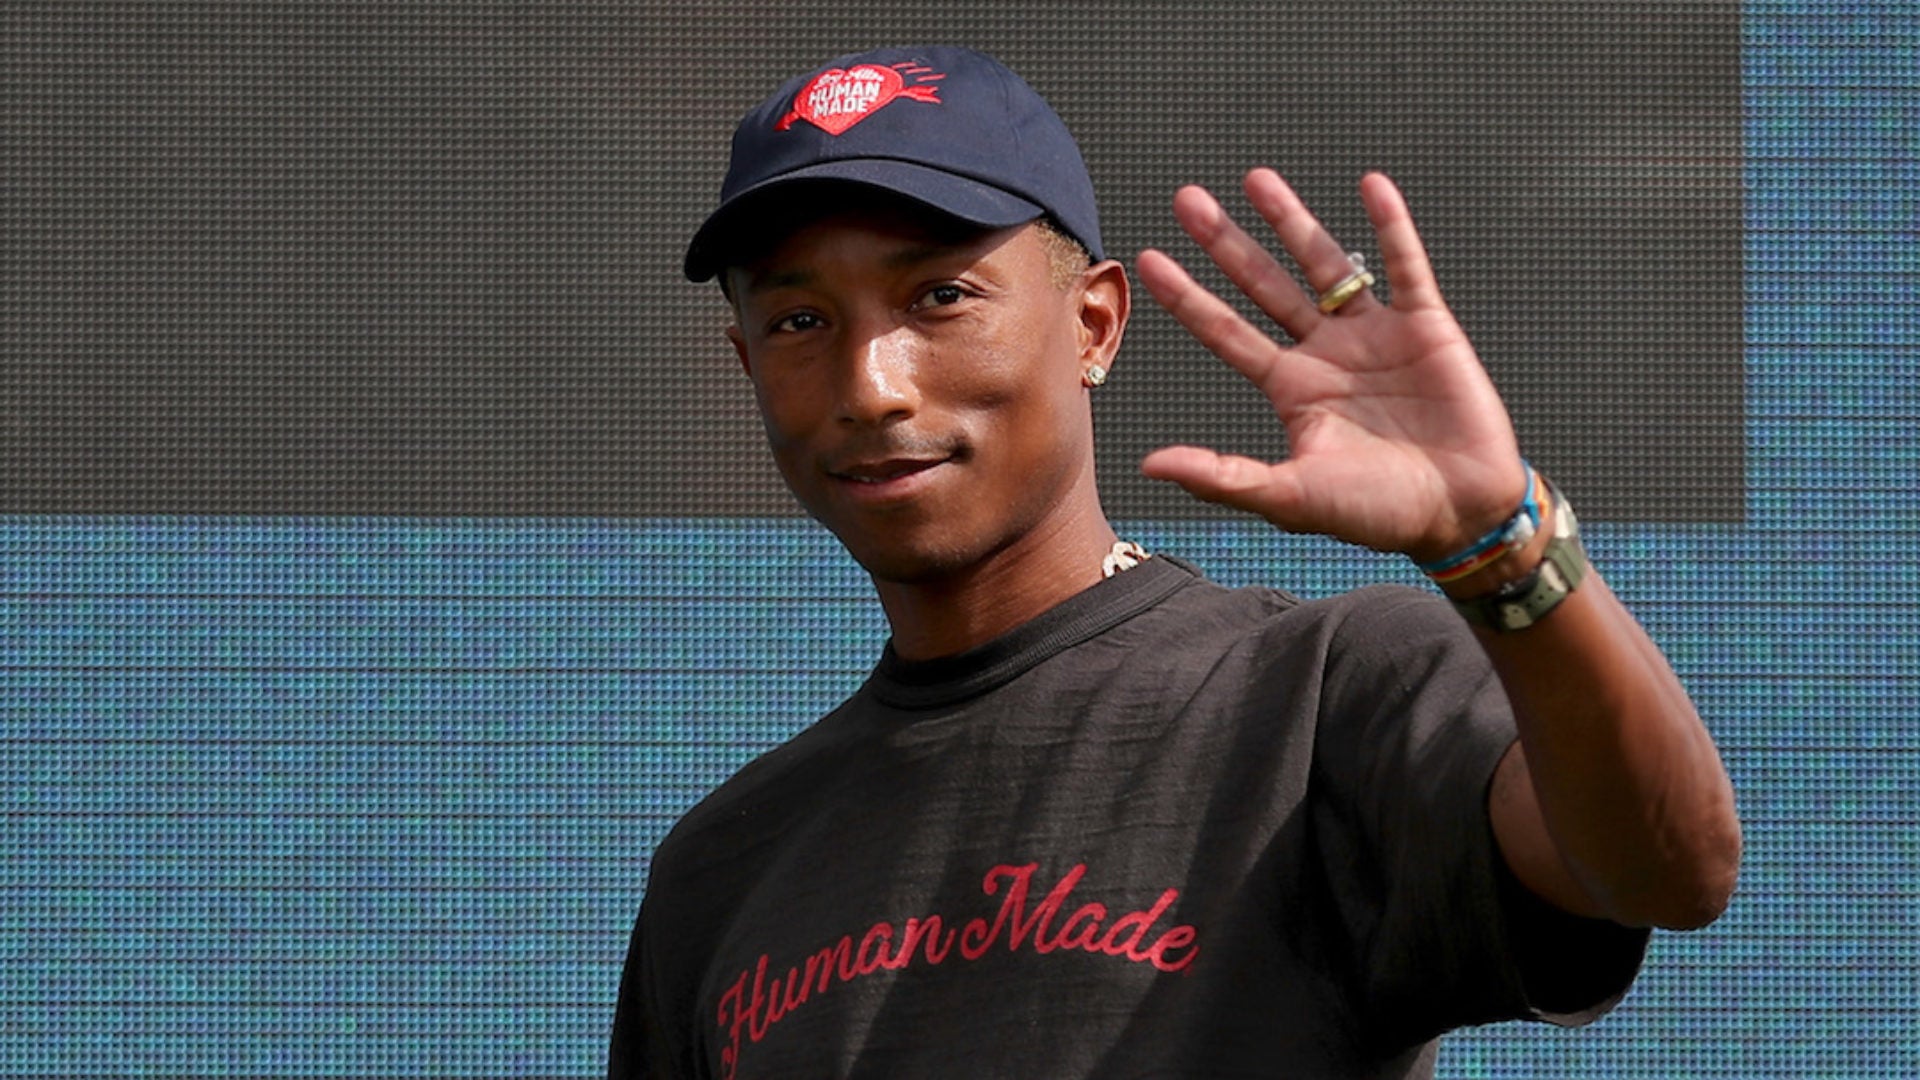 Pharrell Says Response To 'Blurred Lines' Made Him Realize 'We Live In A Chauvinist Culture'